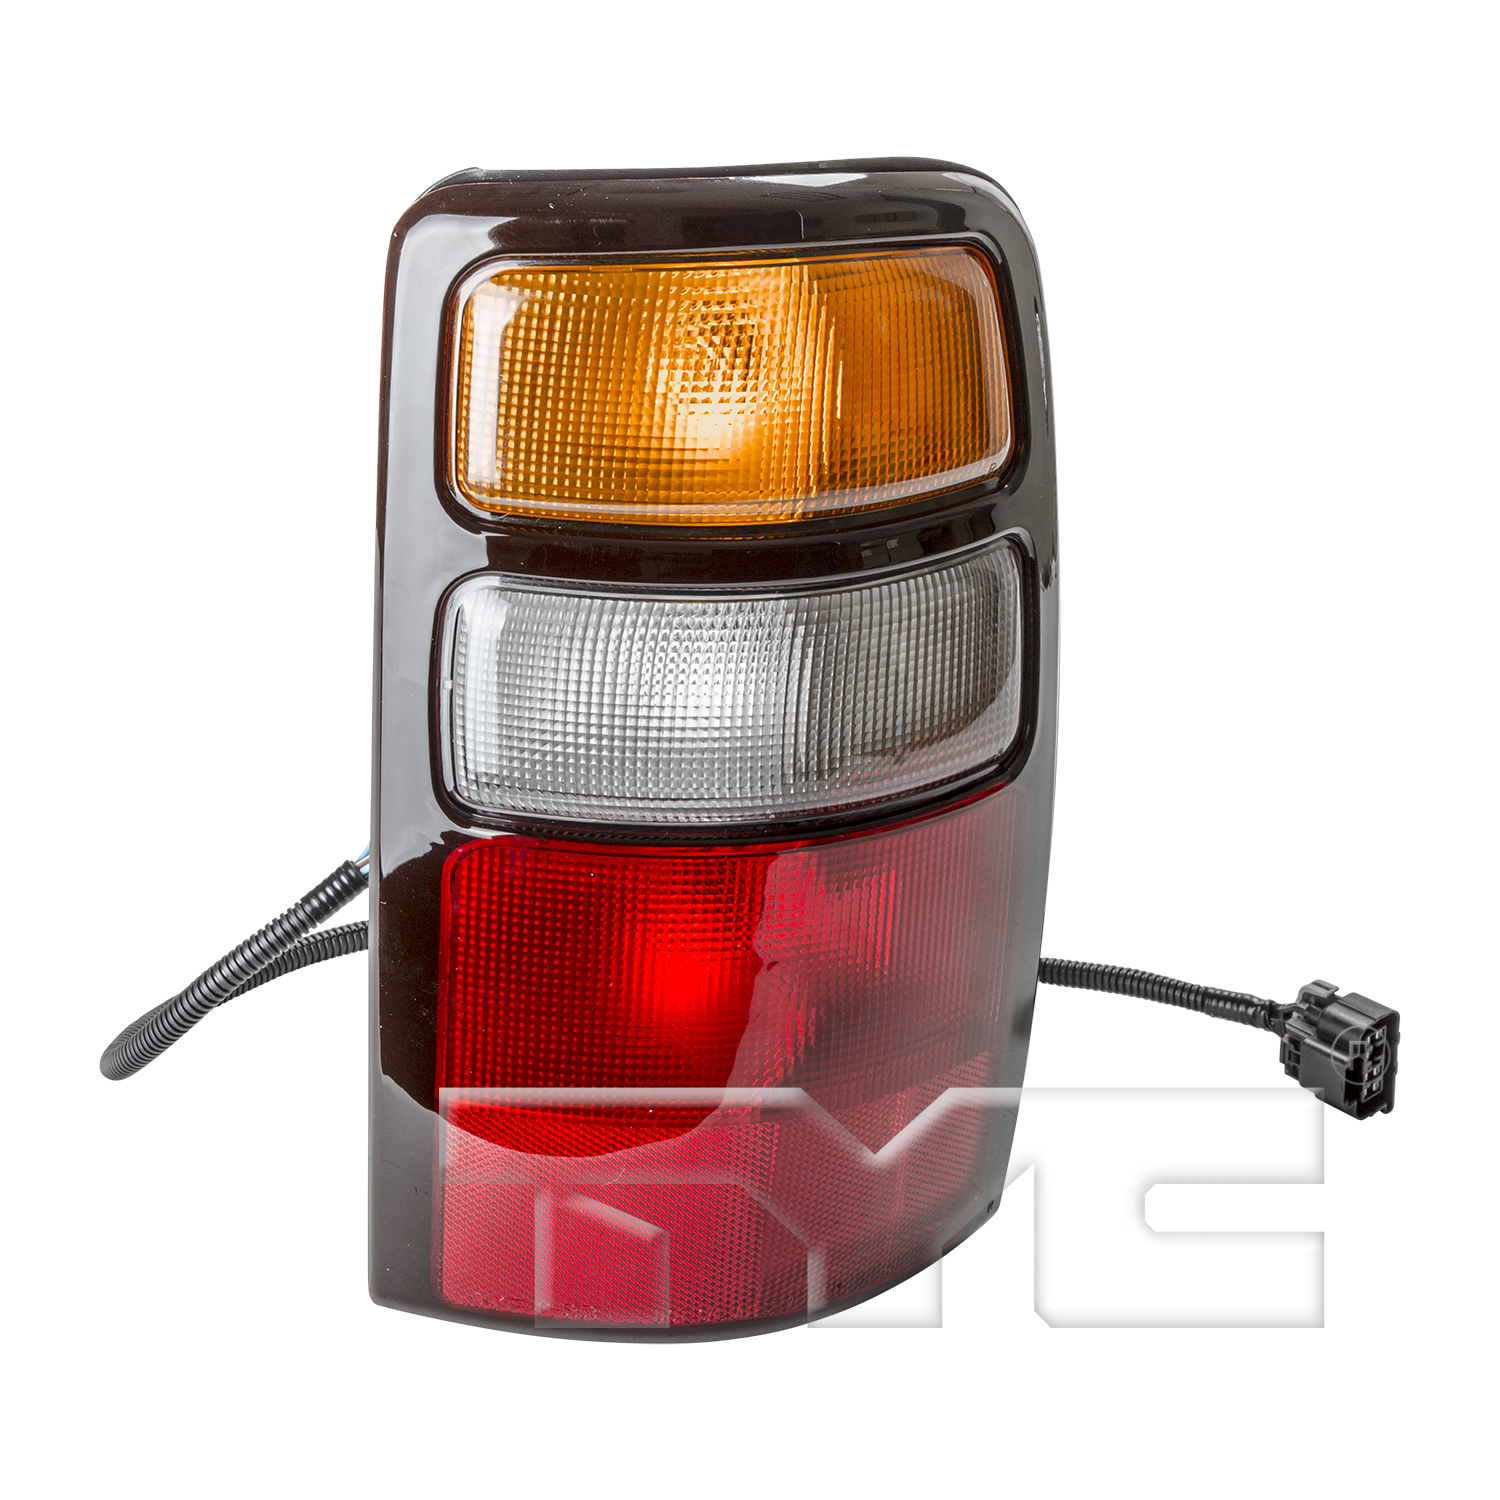 Aftermarket TAILLIGHTS for CHEVROLET - SUBURBAN 1500, SUBURBAN 1500,04-06,RT Taillamp assy